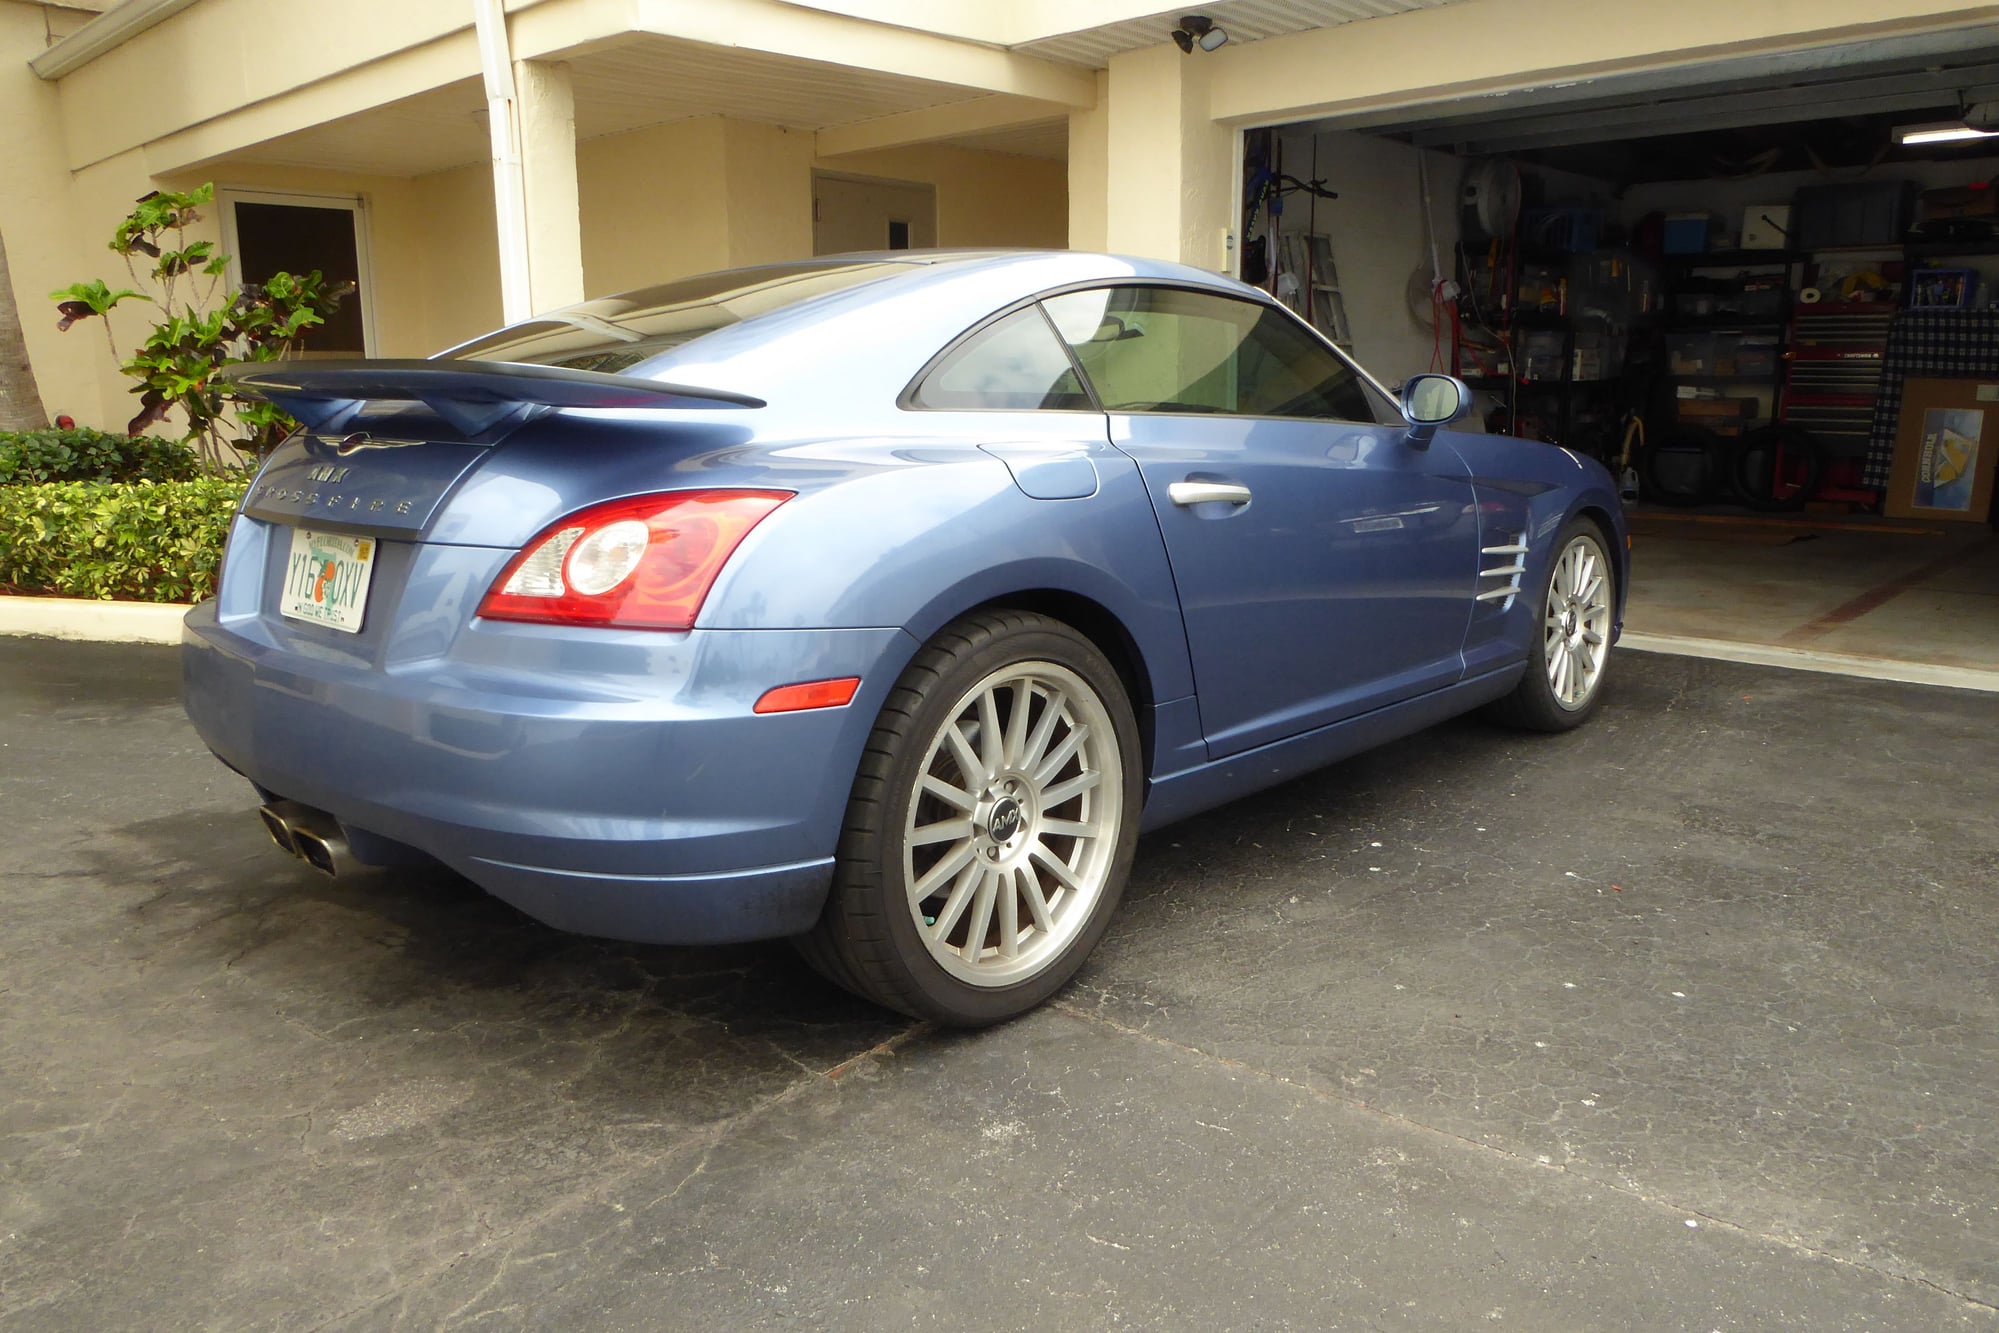 2005 Chrysler Crossfire - If there is one srt6 you want, it is this one, Aero Blue loaded with mods - Used - VIN 1C3AN79N65X050305 - 109,500 Miles - 6 cyl - 2WD - Automatic - Coupe - Blue - Indialantic, FL 32903, United States